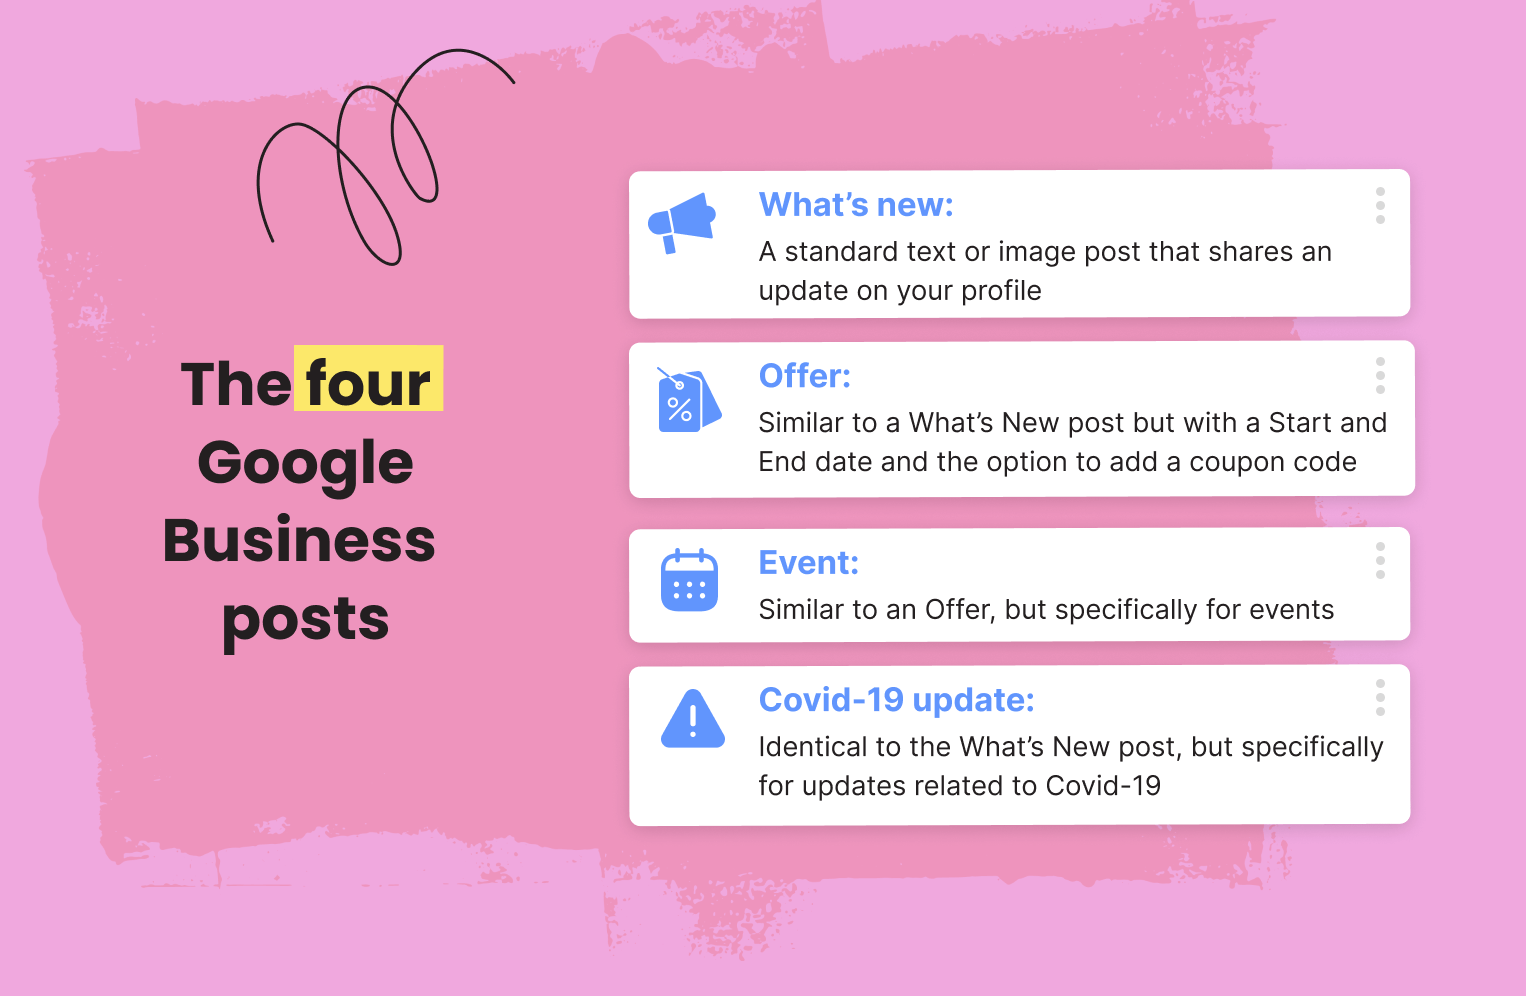 Showing the four types of Google Business posts